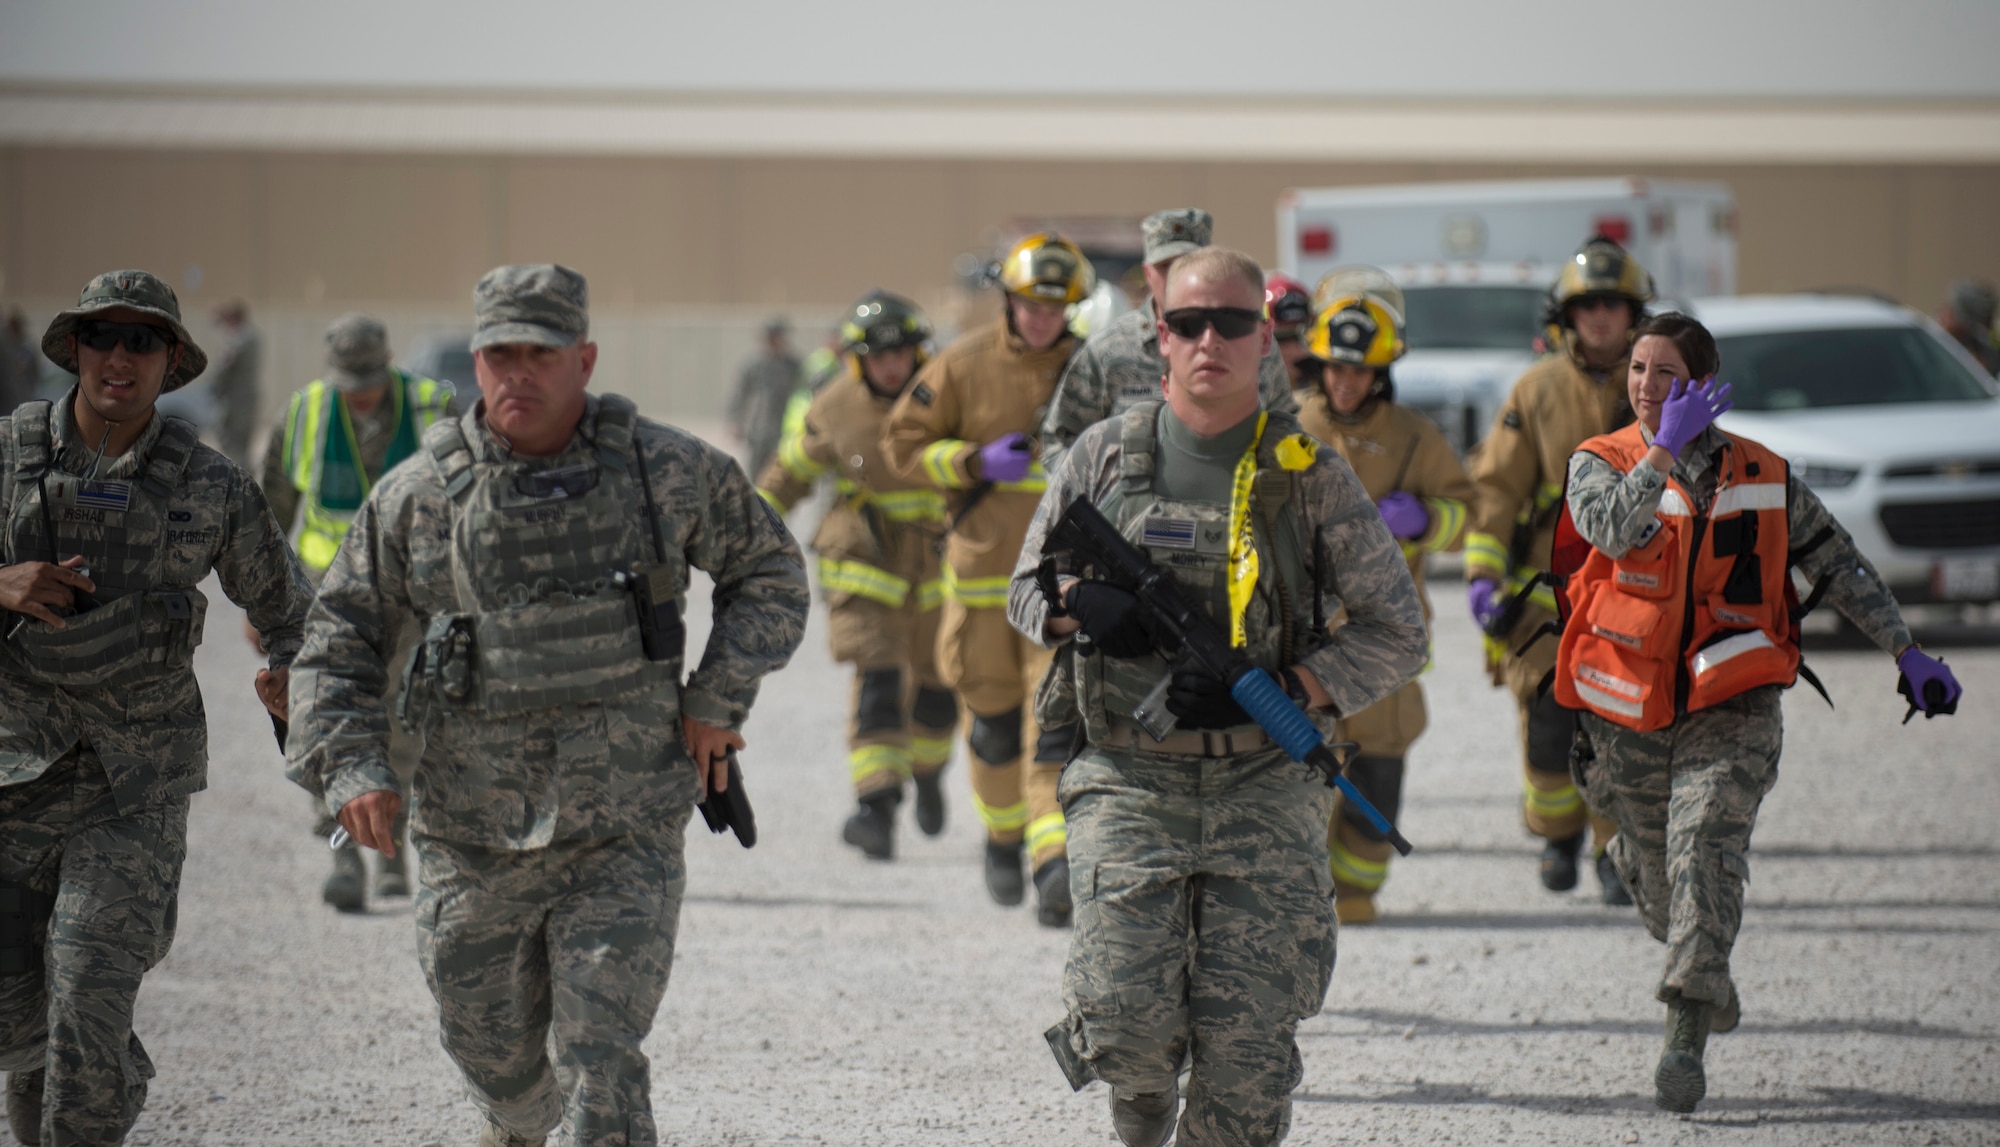 First responders from 379th Expeditionary Air Expeditionary Wing run to the scene of the active shooter exercise in order to administer medical treatment to victims at Al Udeid Air Base, Qatar, April 17, 2017. The active shooter exercise tested the skills and abilities of Airmen to work with other units in in order to gain a better understanding of each other’s roles in the event of a real-world situation.   (U.S. Air Force photo by Tech. Sgt. Amy M. Lovgren)